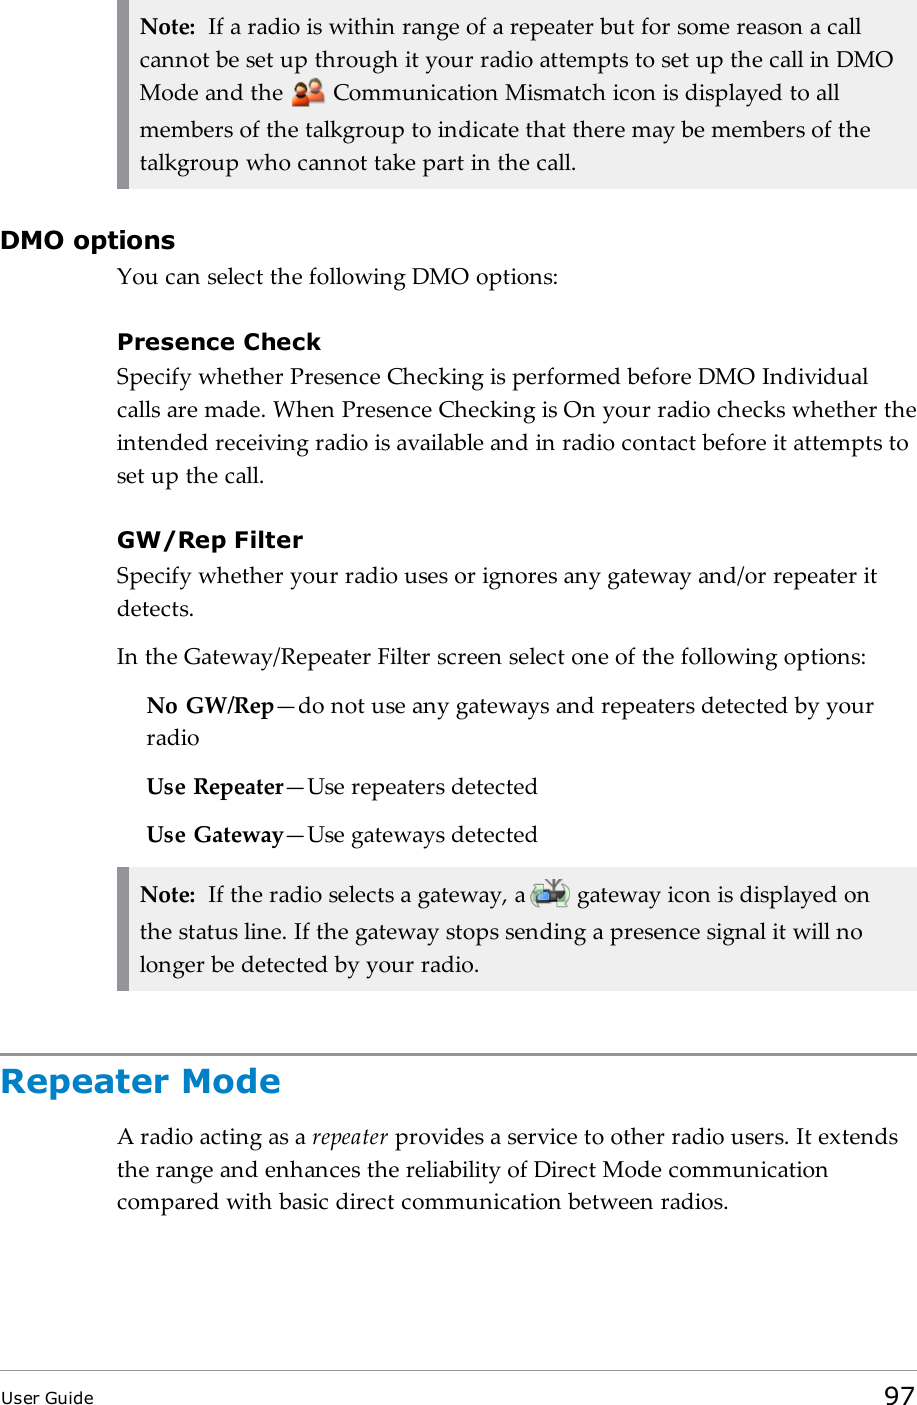 Note: If a radio is within range of a repeater but for some reason a callcannot be set up through it your radio attempts to set up the call in DMOMode and the Communication Mismatch icon is displayed to allmembers of the talkgroup to indicate that there may be members of thetalkgroup who cannot take part in the call.DMO optionsYou can select the following DMO options:Presence CheckSpecify whether Presence Checking is performed before DMO Individualcalls are made. When Presence Checking is On your radio checks whether theintended receiving radio is available and in radio contact before it attempts toset up the call.GW/Rep FilterSpecify whether your radio uses or ignores any gateway and/or repeater itdetects.In the Gateway/Repeater Filter screen select one of the following options:No GW/Rep—do not use any gateways and repeaters detected by yourradioUse Repeater—Use repeaters detectedUse Gateway—Use gateways detectedNote: If the radio selects a gateway, a gateway icon is displayed onthe status line. If the gateway stops sending a presence signal it will nolonger be detected by your radio.Repeater ModeA radio acting as a repeater provides a service to other radio users. It extendsthe range and enhances the reliability of Direct Mode communicationcompared with basic direct communication between radios.User Guide 97